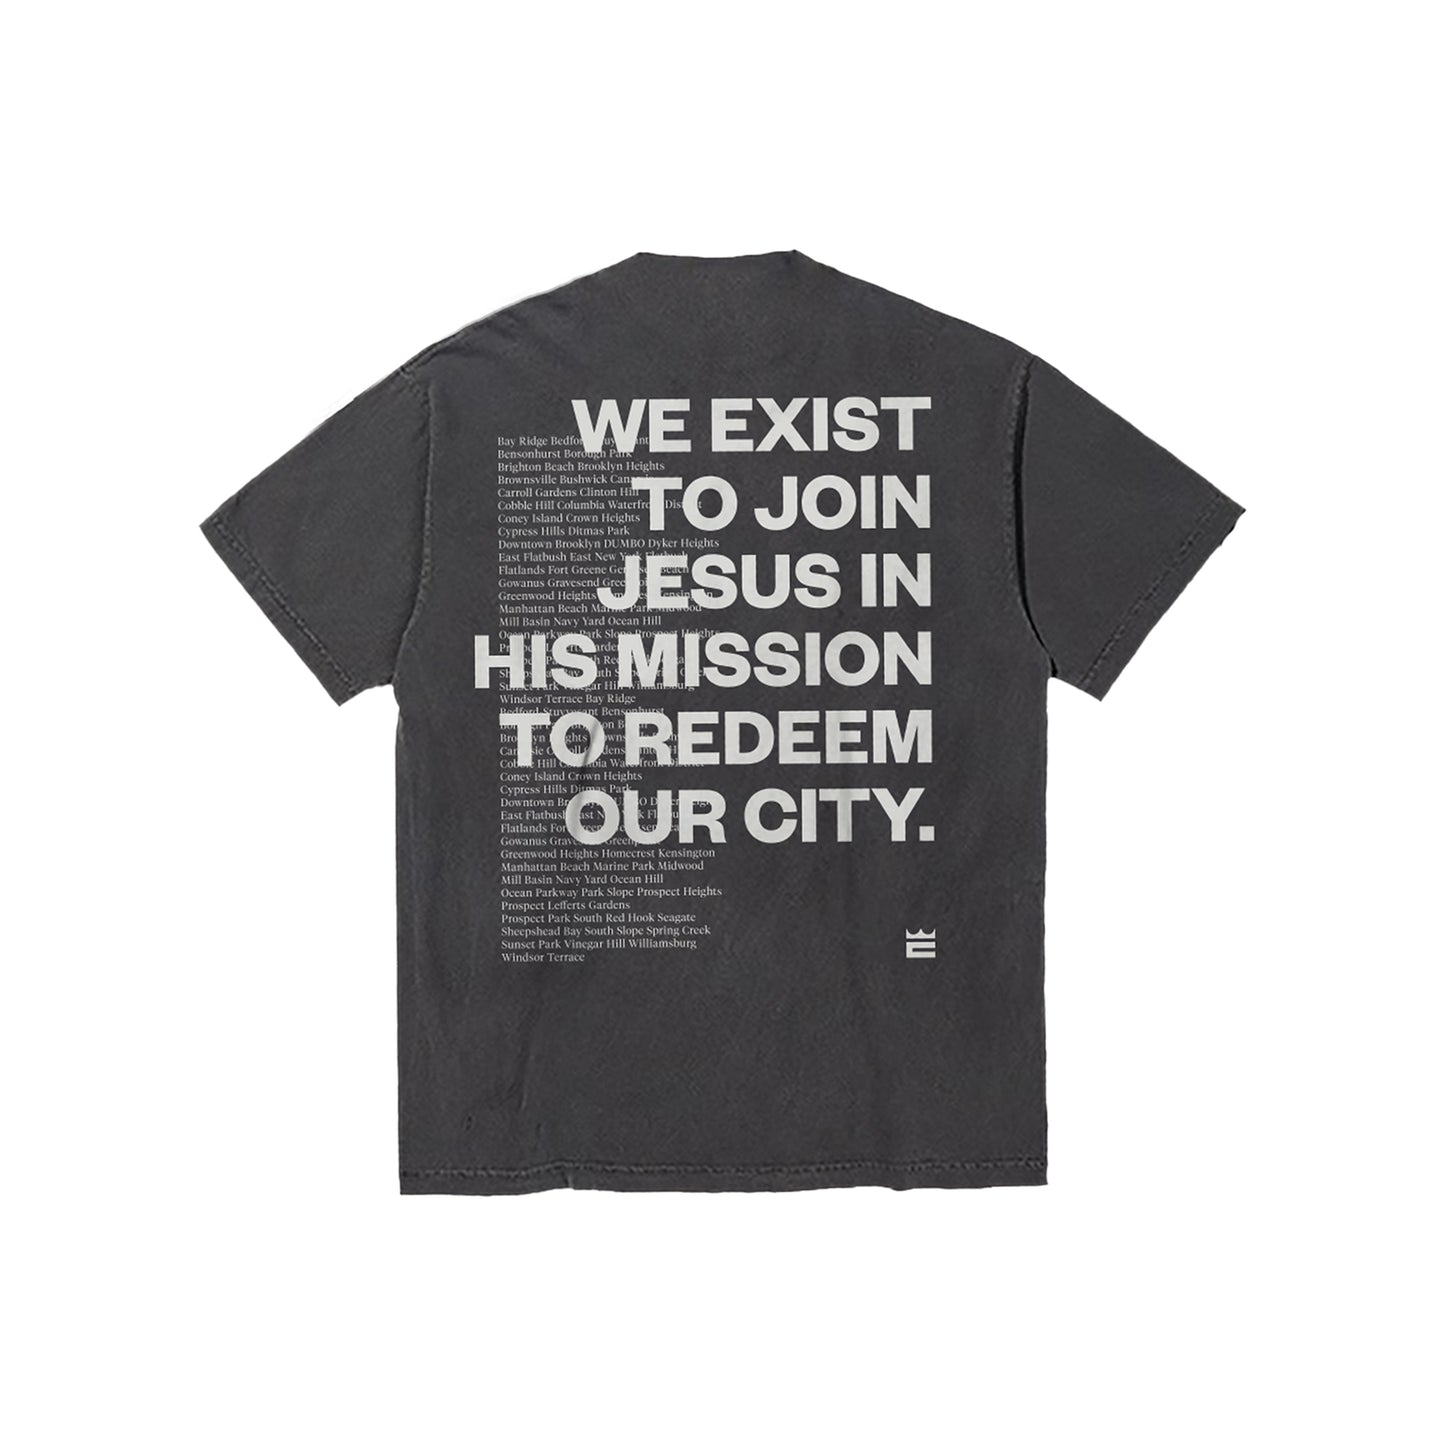 Mission Possible T-shirt